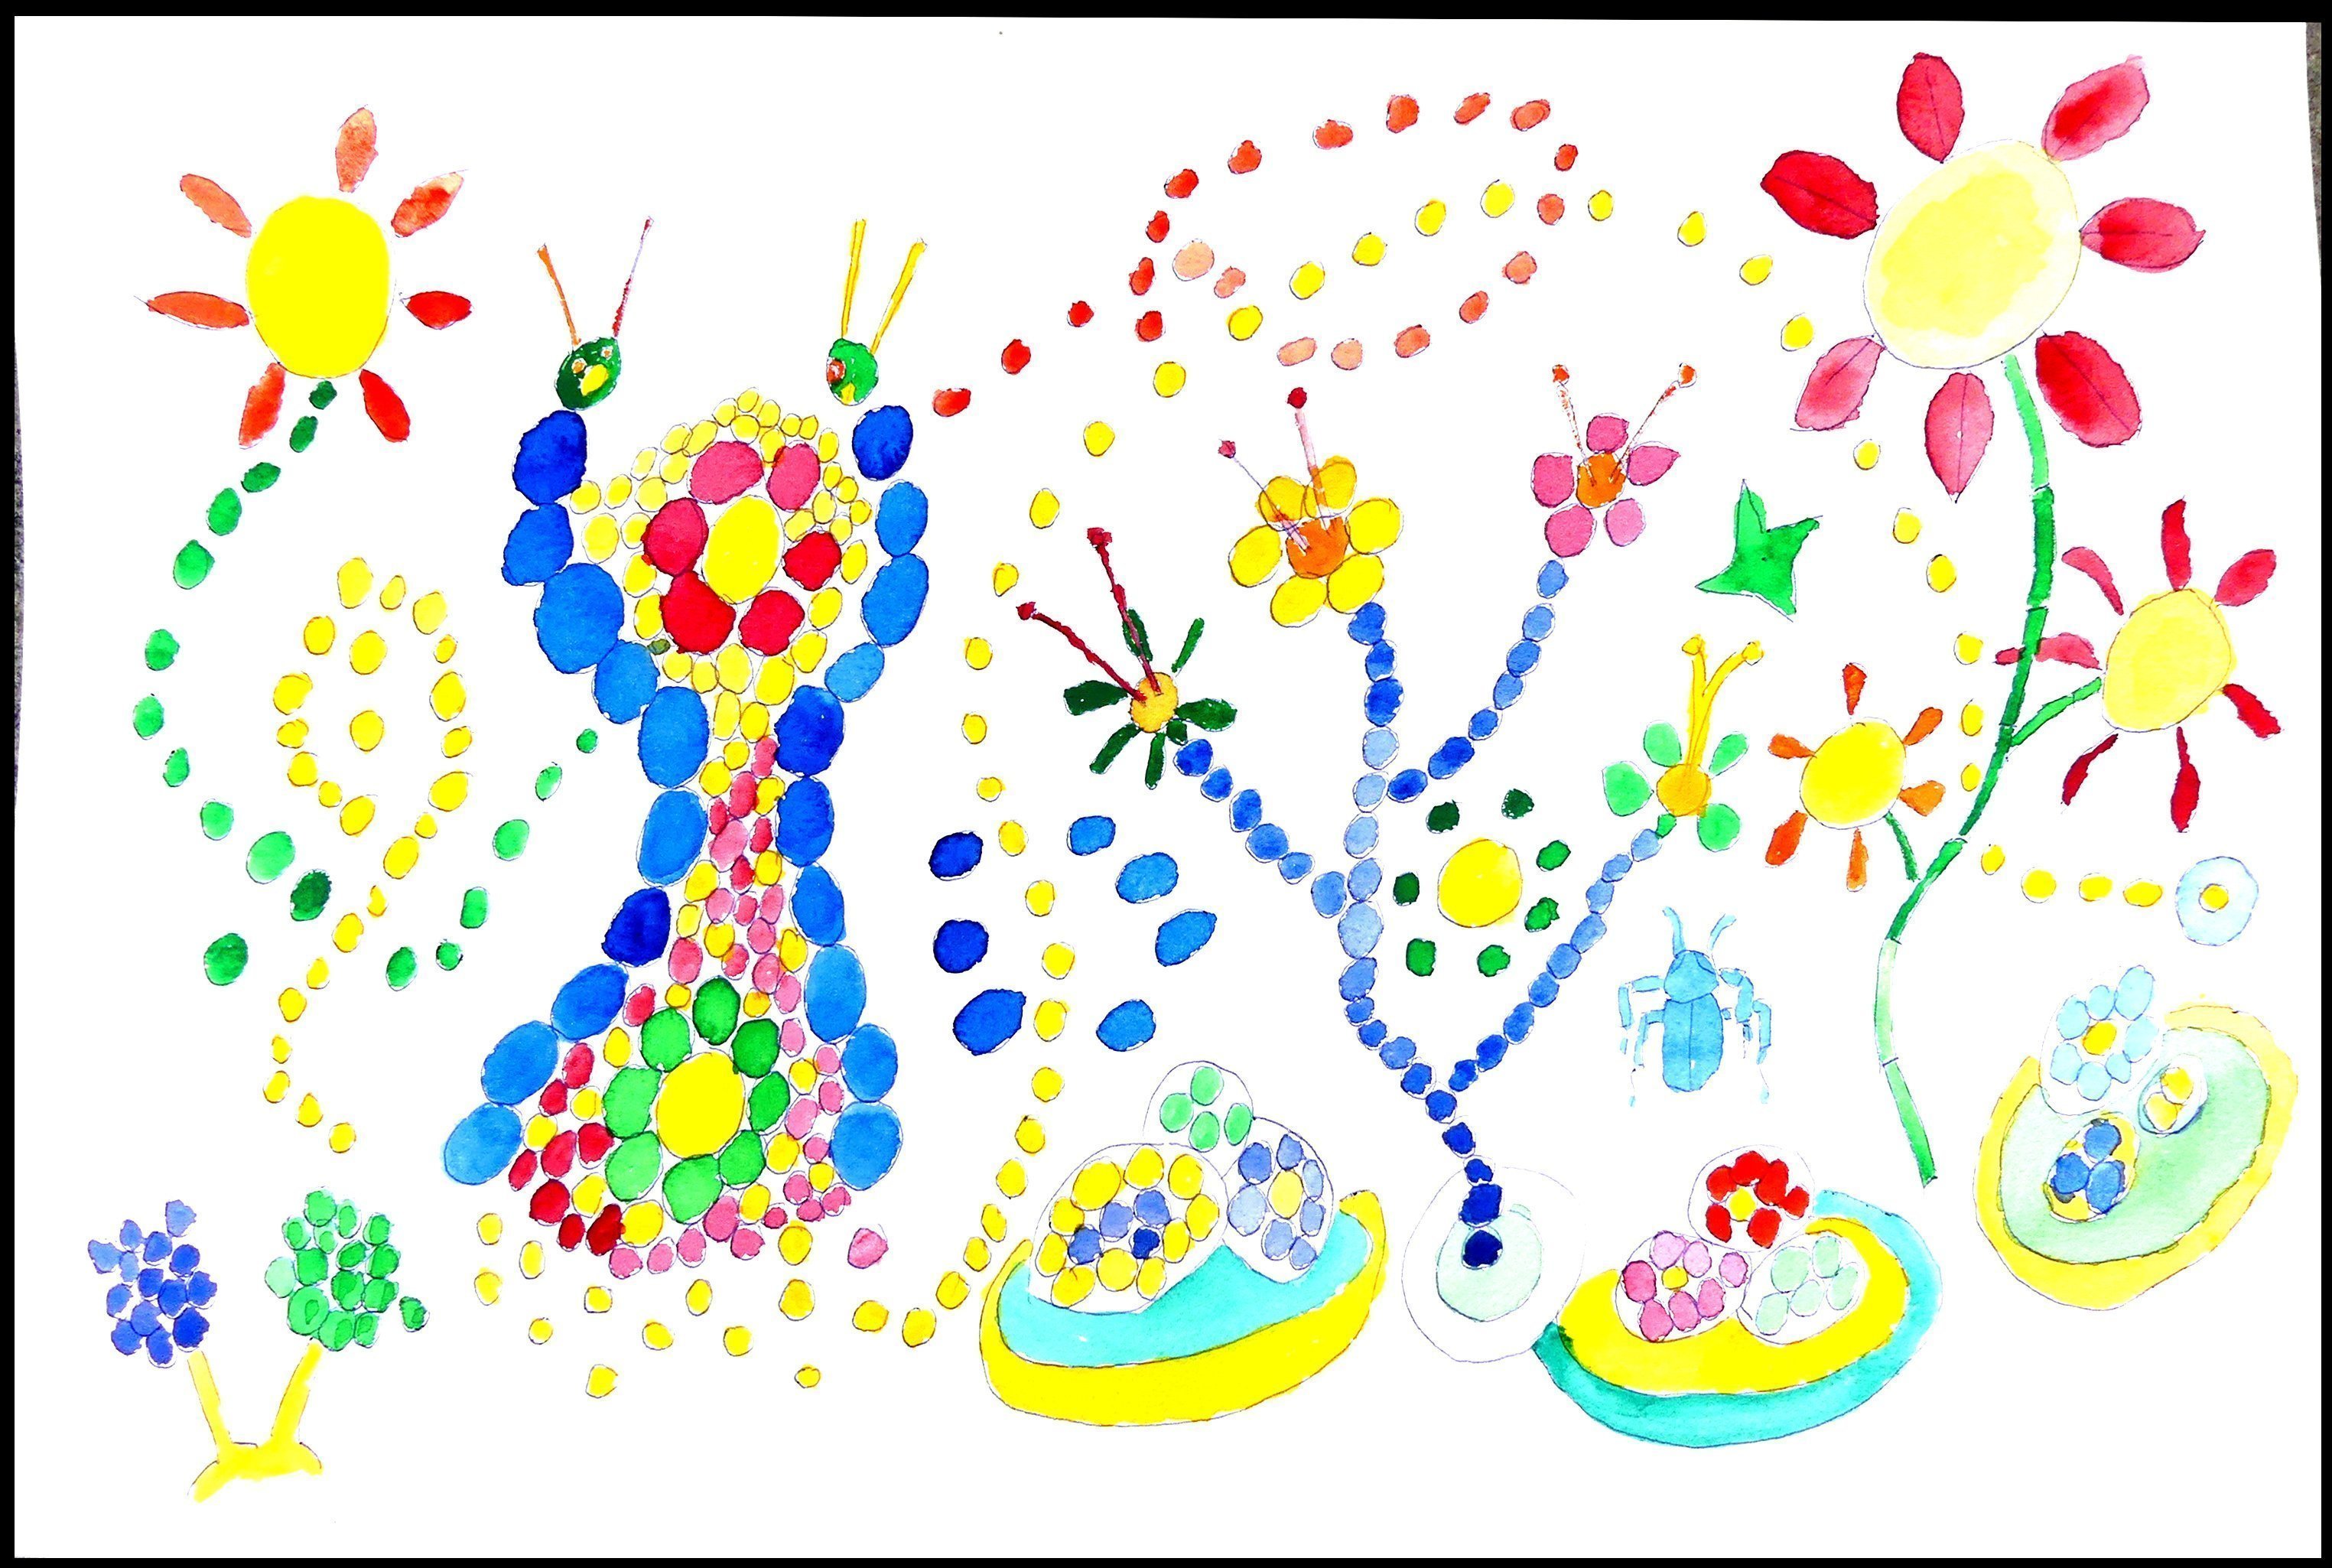 Palle Adamos Finn Jensen: 'Sejr Victory', 2021 Watercolor, Mandala. watercolor.  red yellow, green bluee, pimary colors.  bobbels creating shapes and patterns.  dancing and flowers...